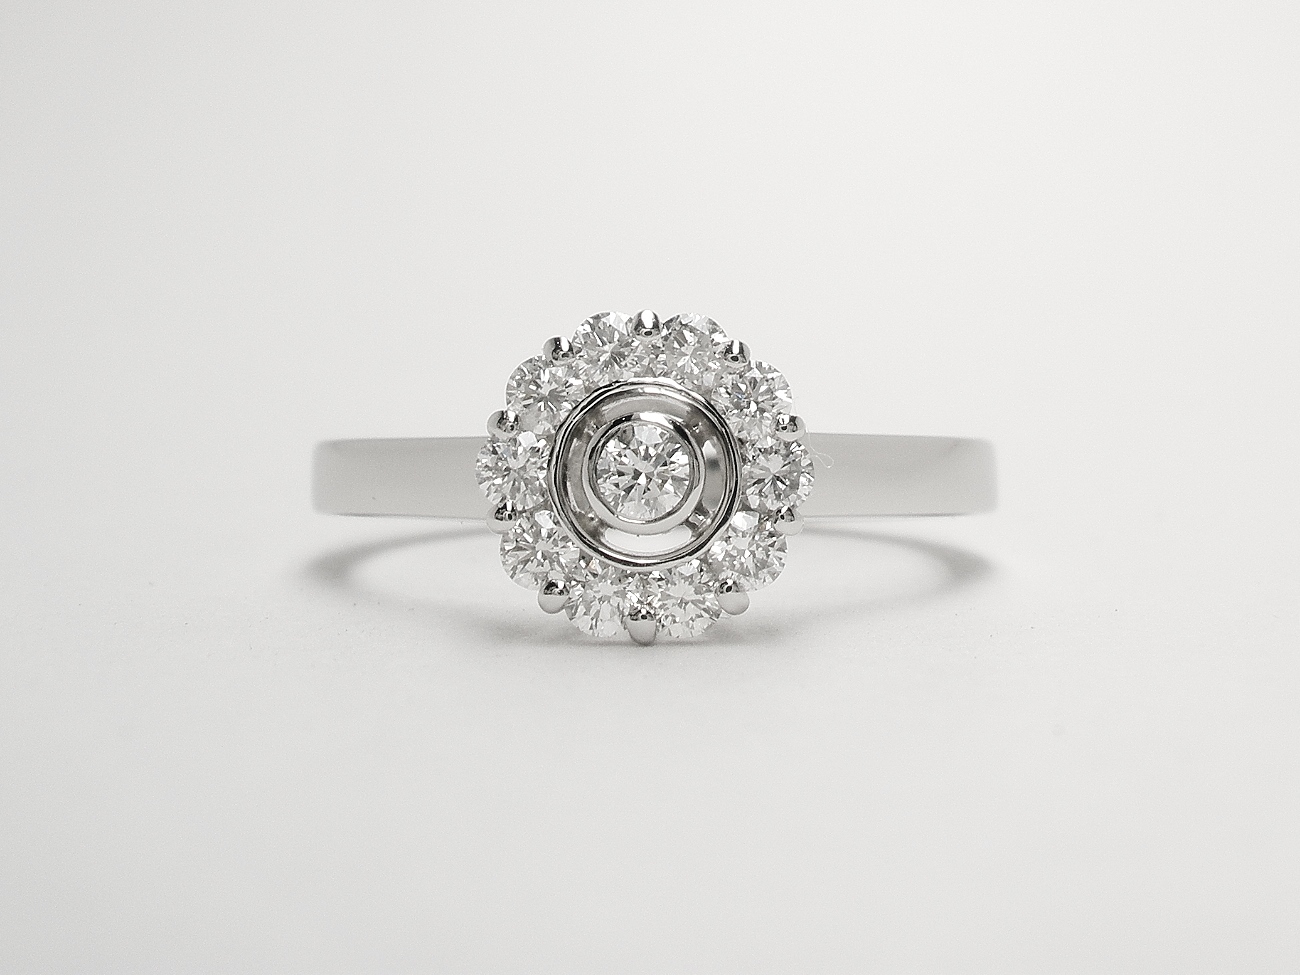 An 11 stone round brilliant cut diamond 'Halo' style cluster ring mounted in platinum.